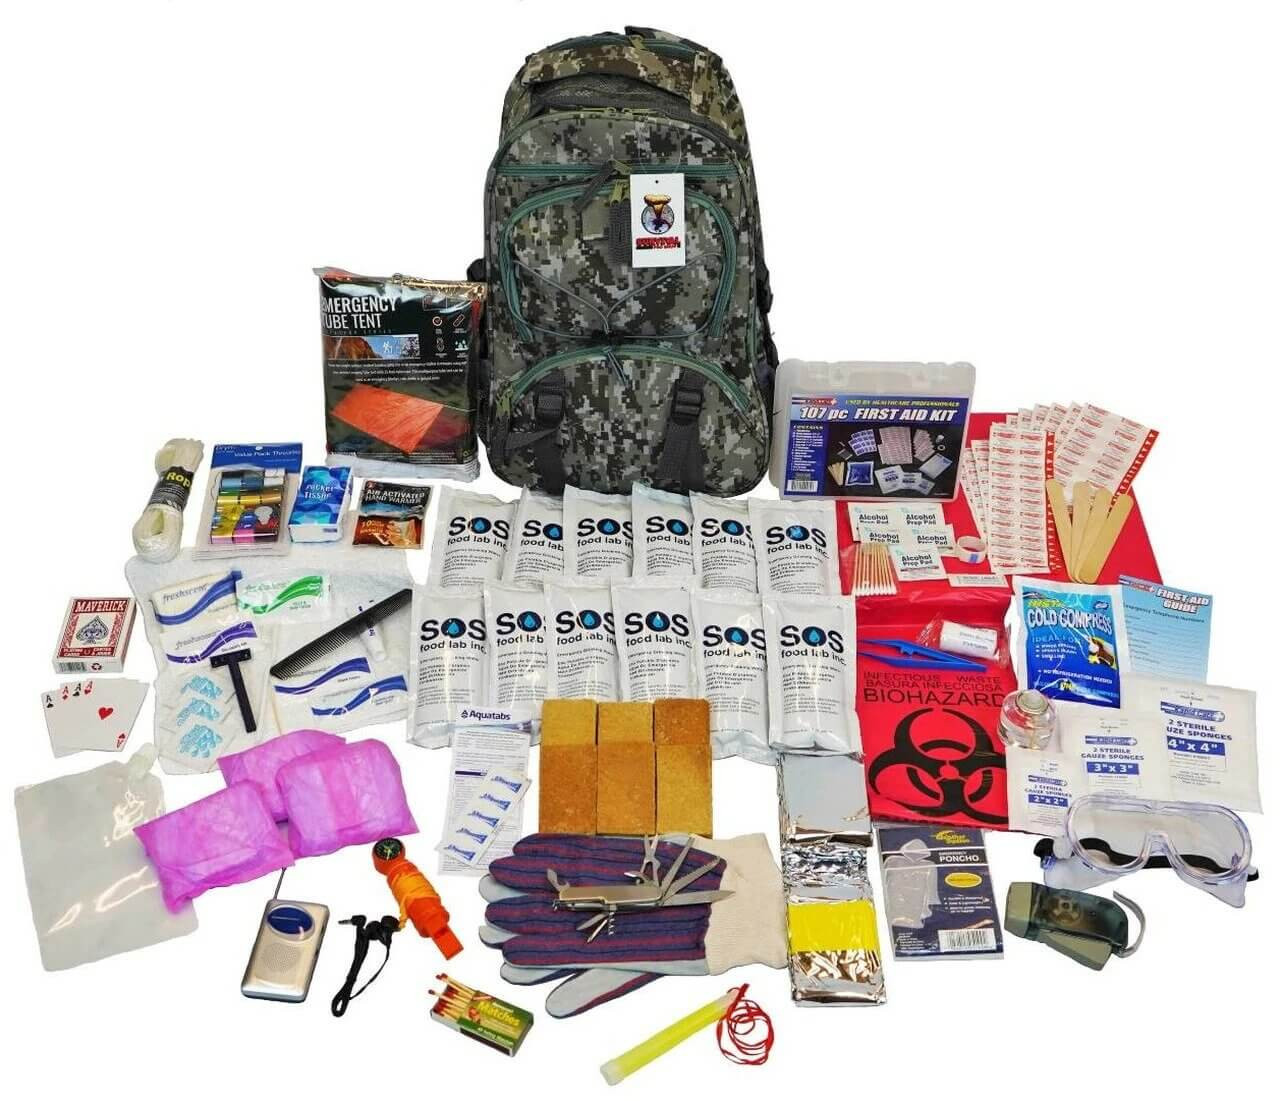 Wise Five Day Emergency Survival Kit with Food & Water for One Person – Camo